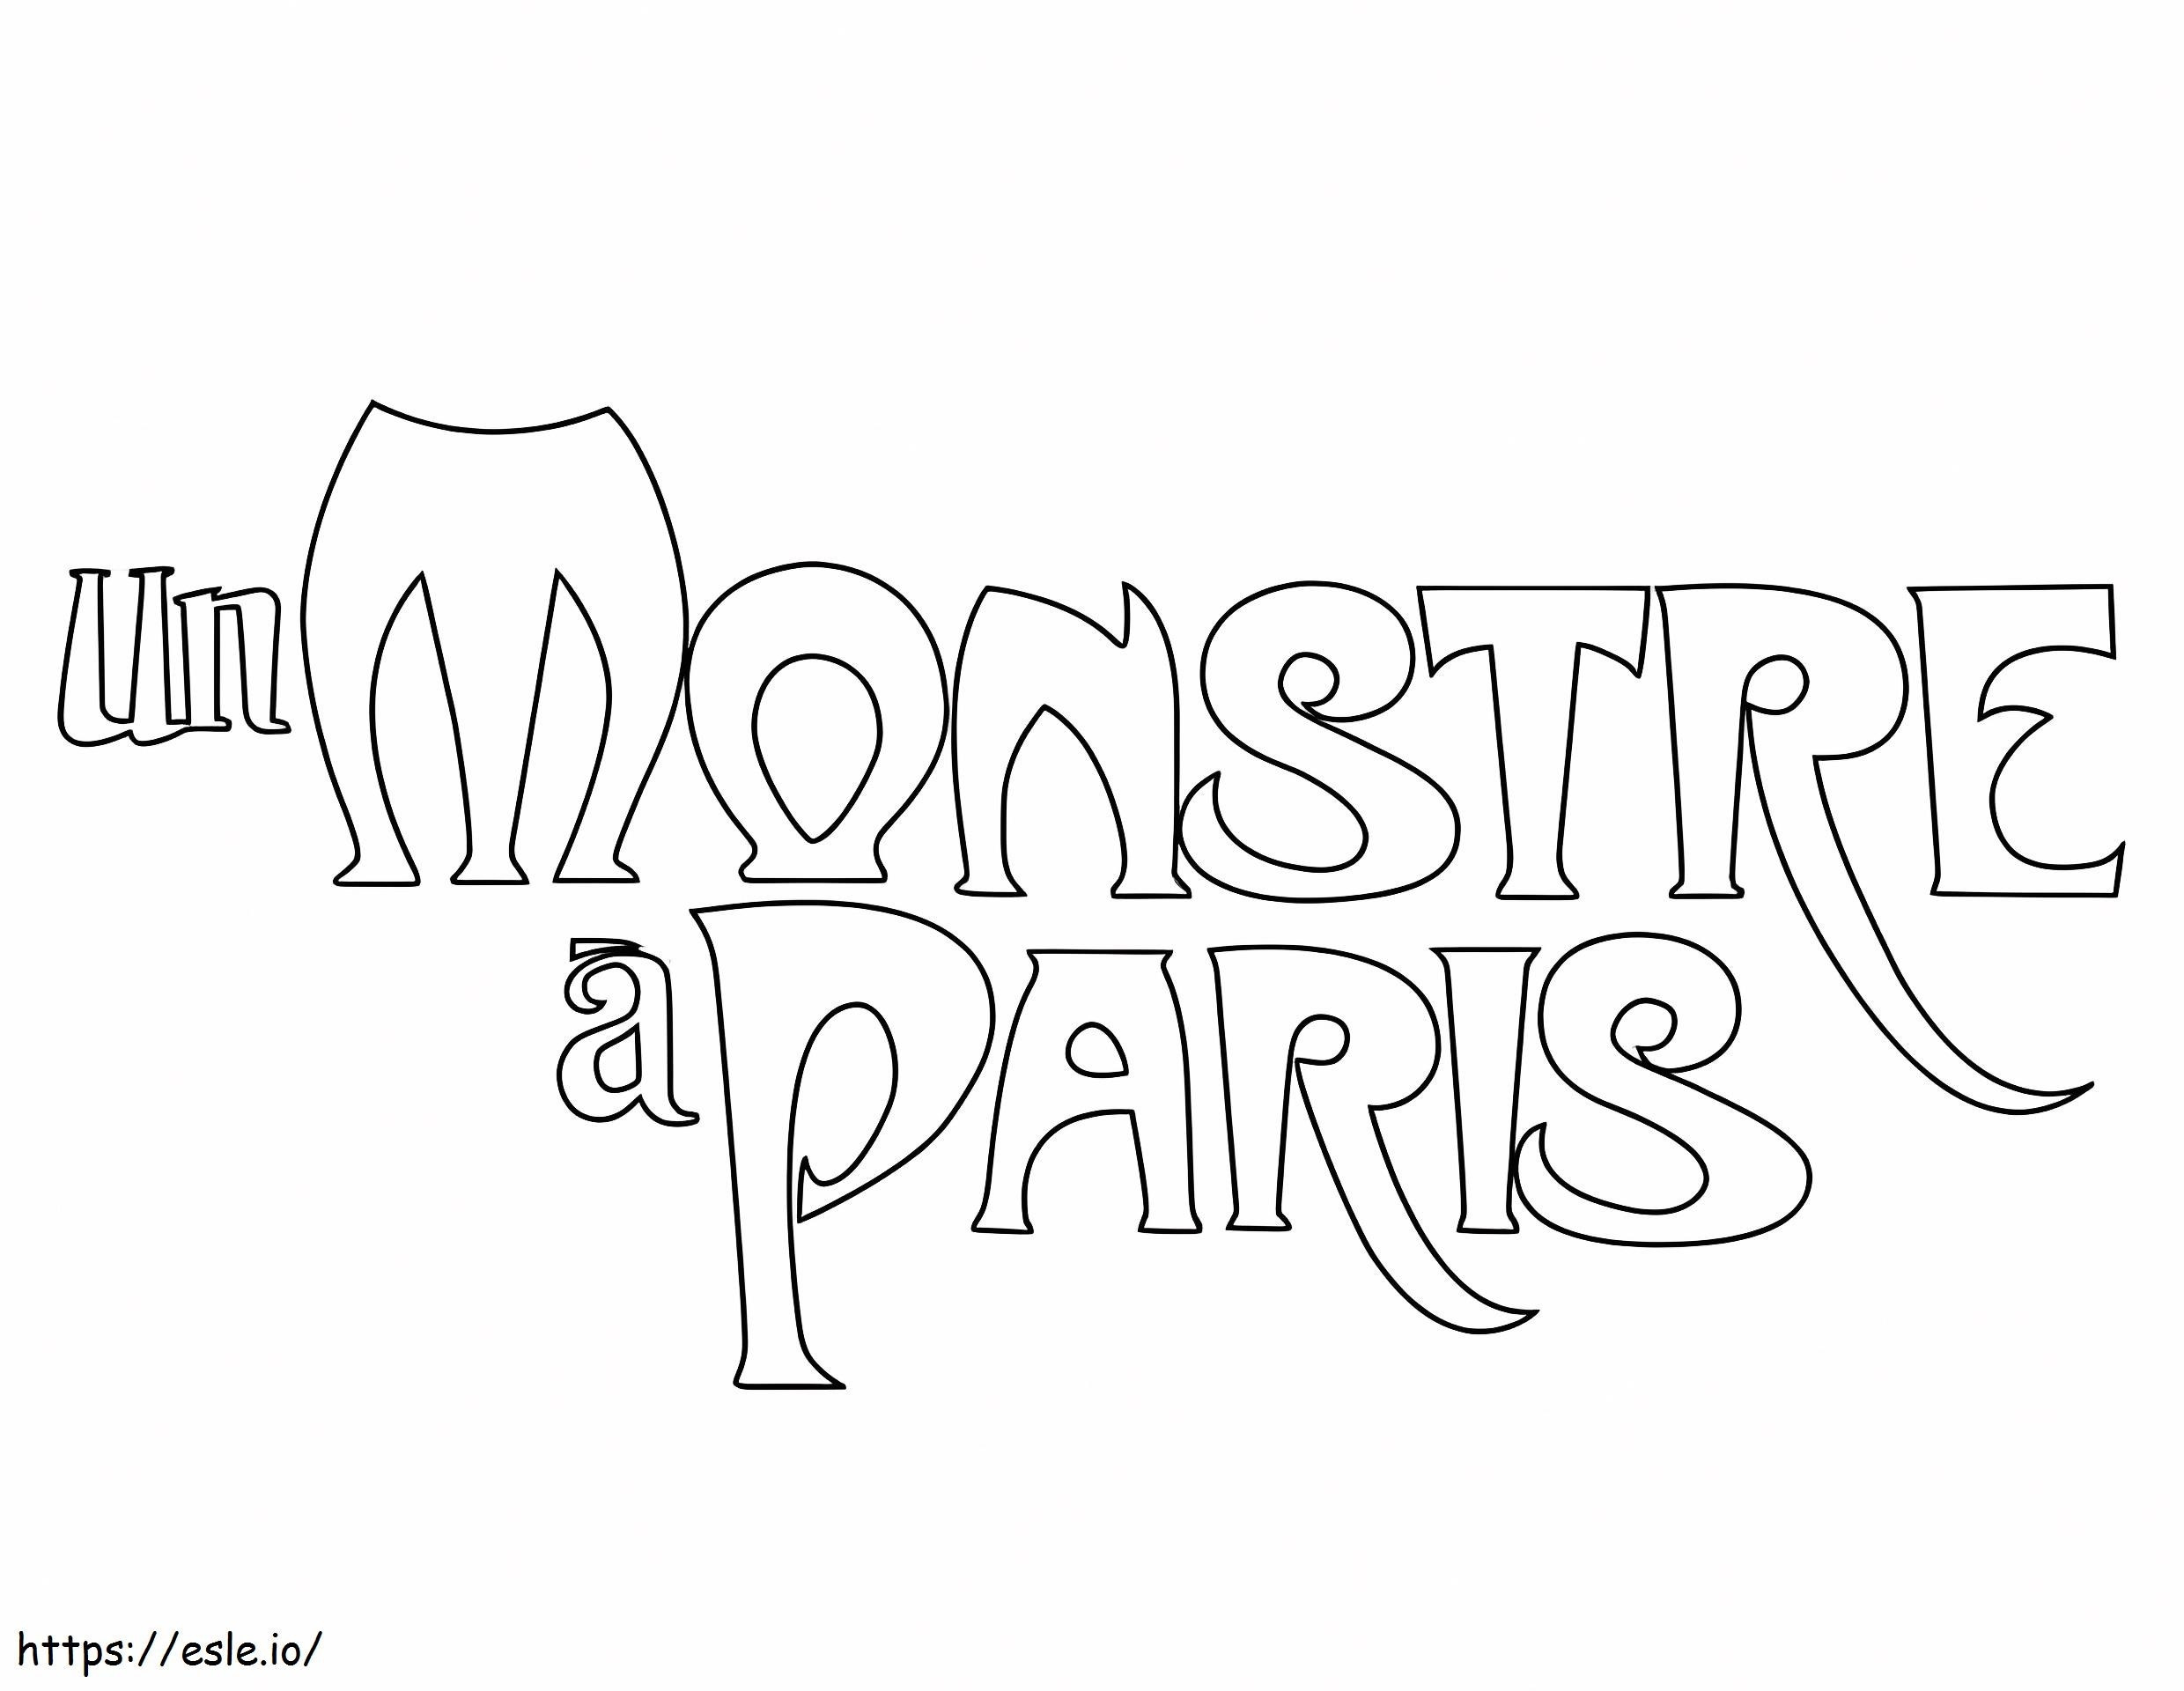 A Monster In Paris 1 coloring page